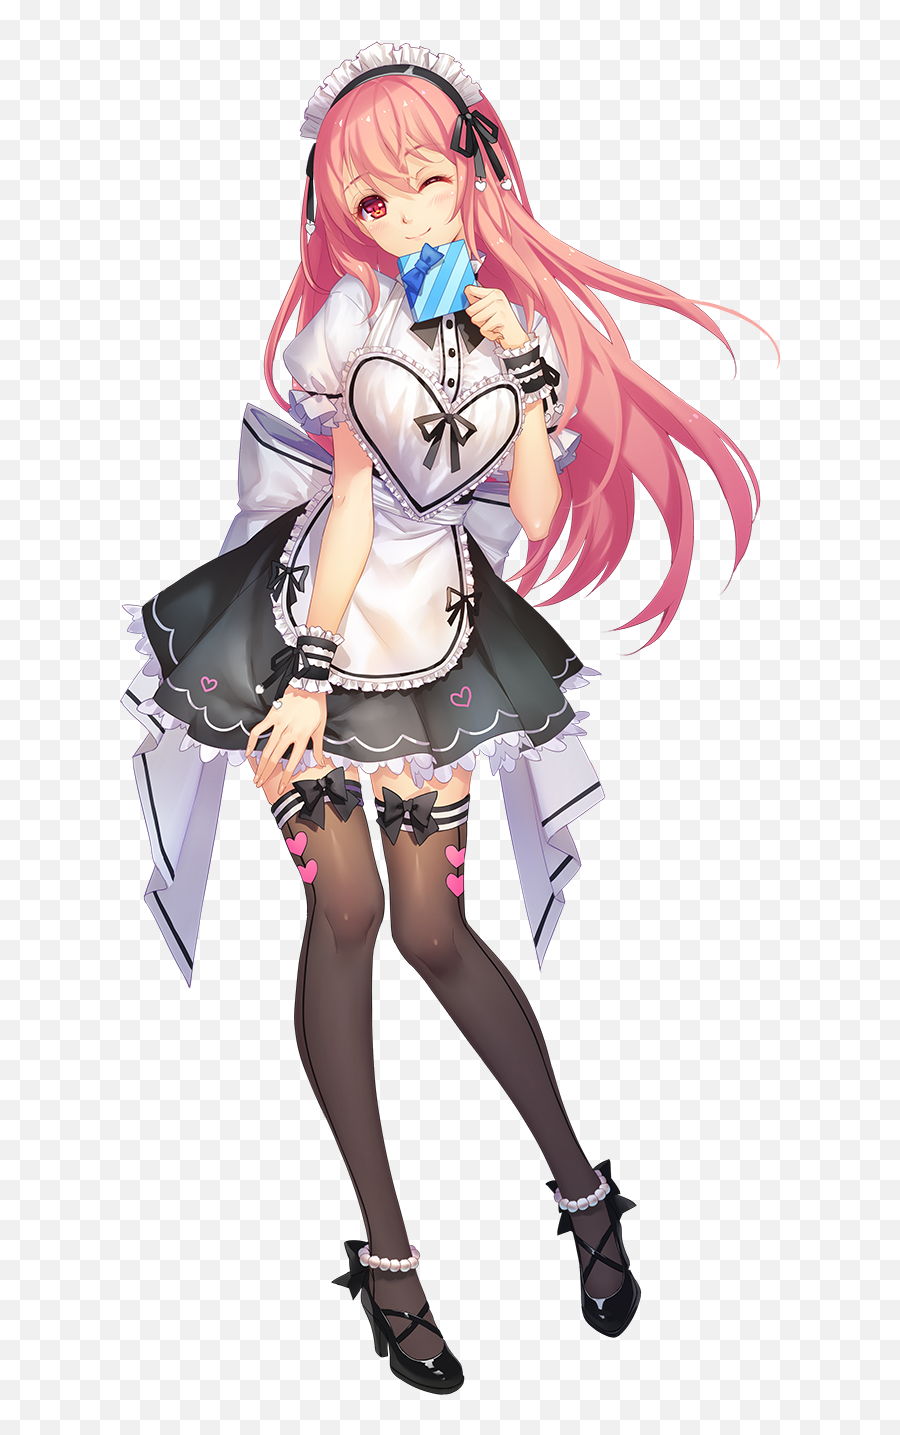 Transparent Background - Zerochan Anime Image Board Anime Maid Pink Hair Png,Anime Transparent Background